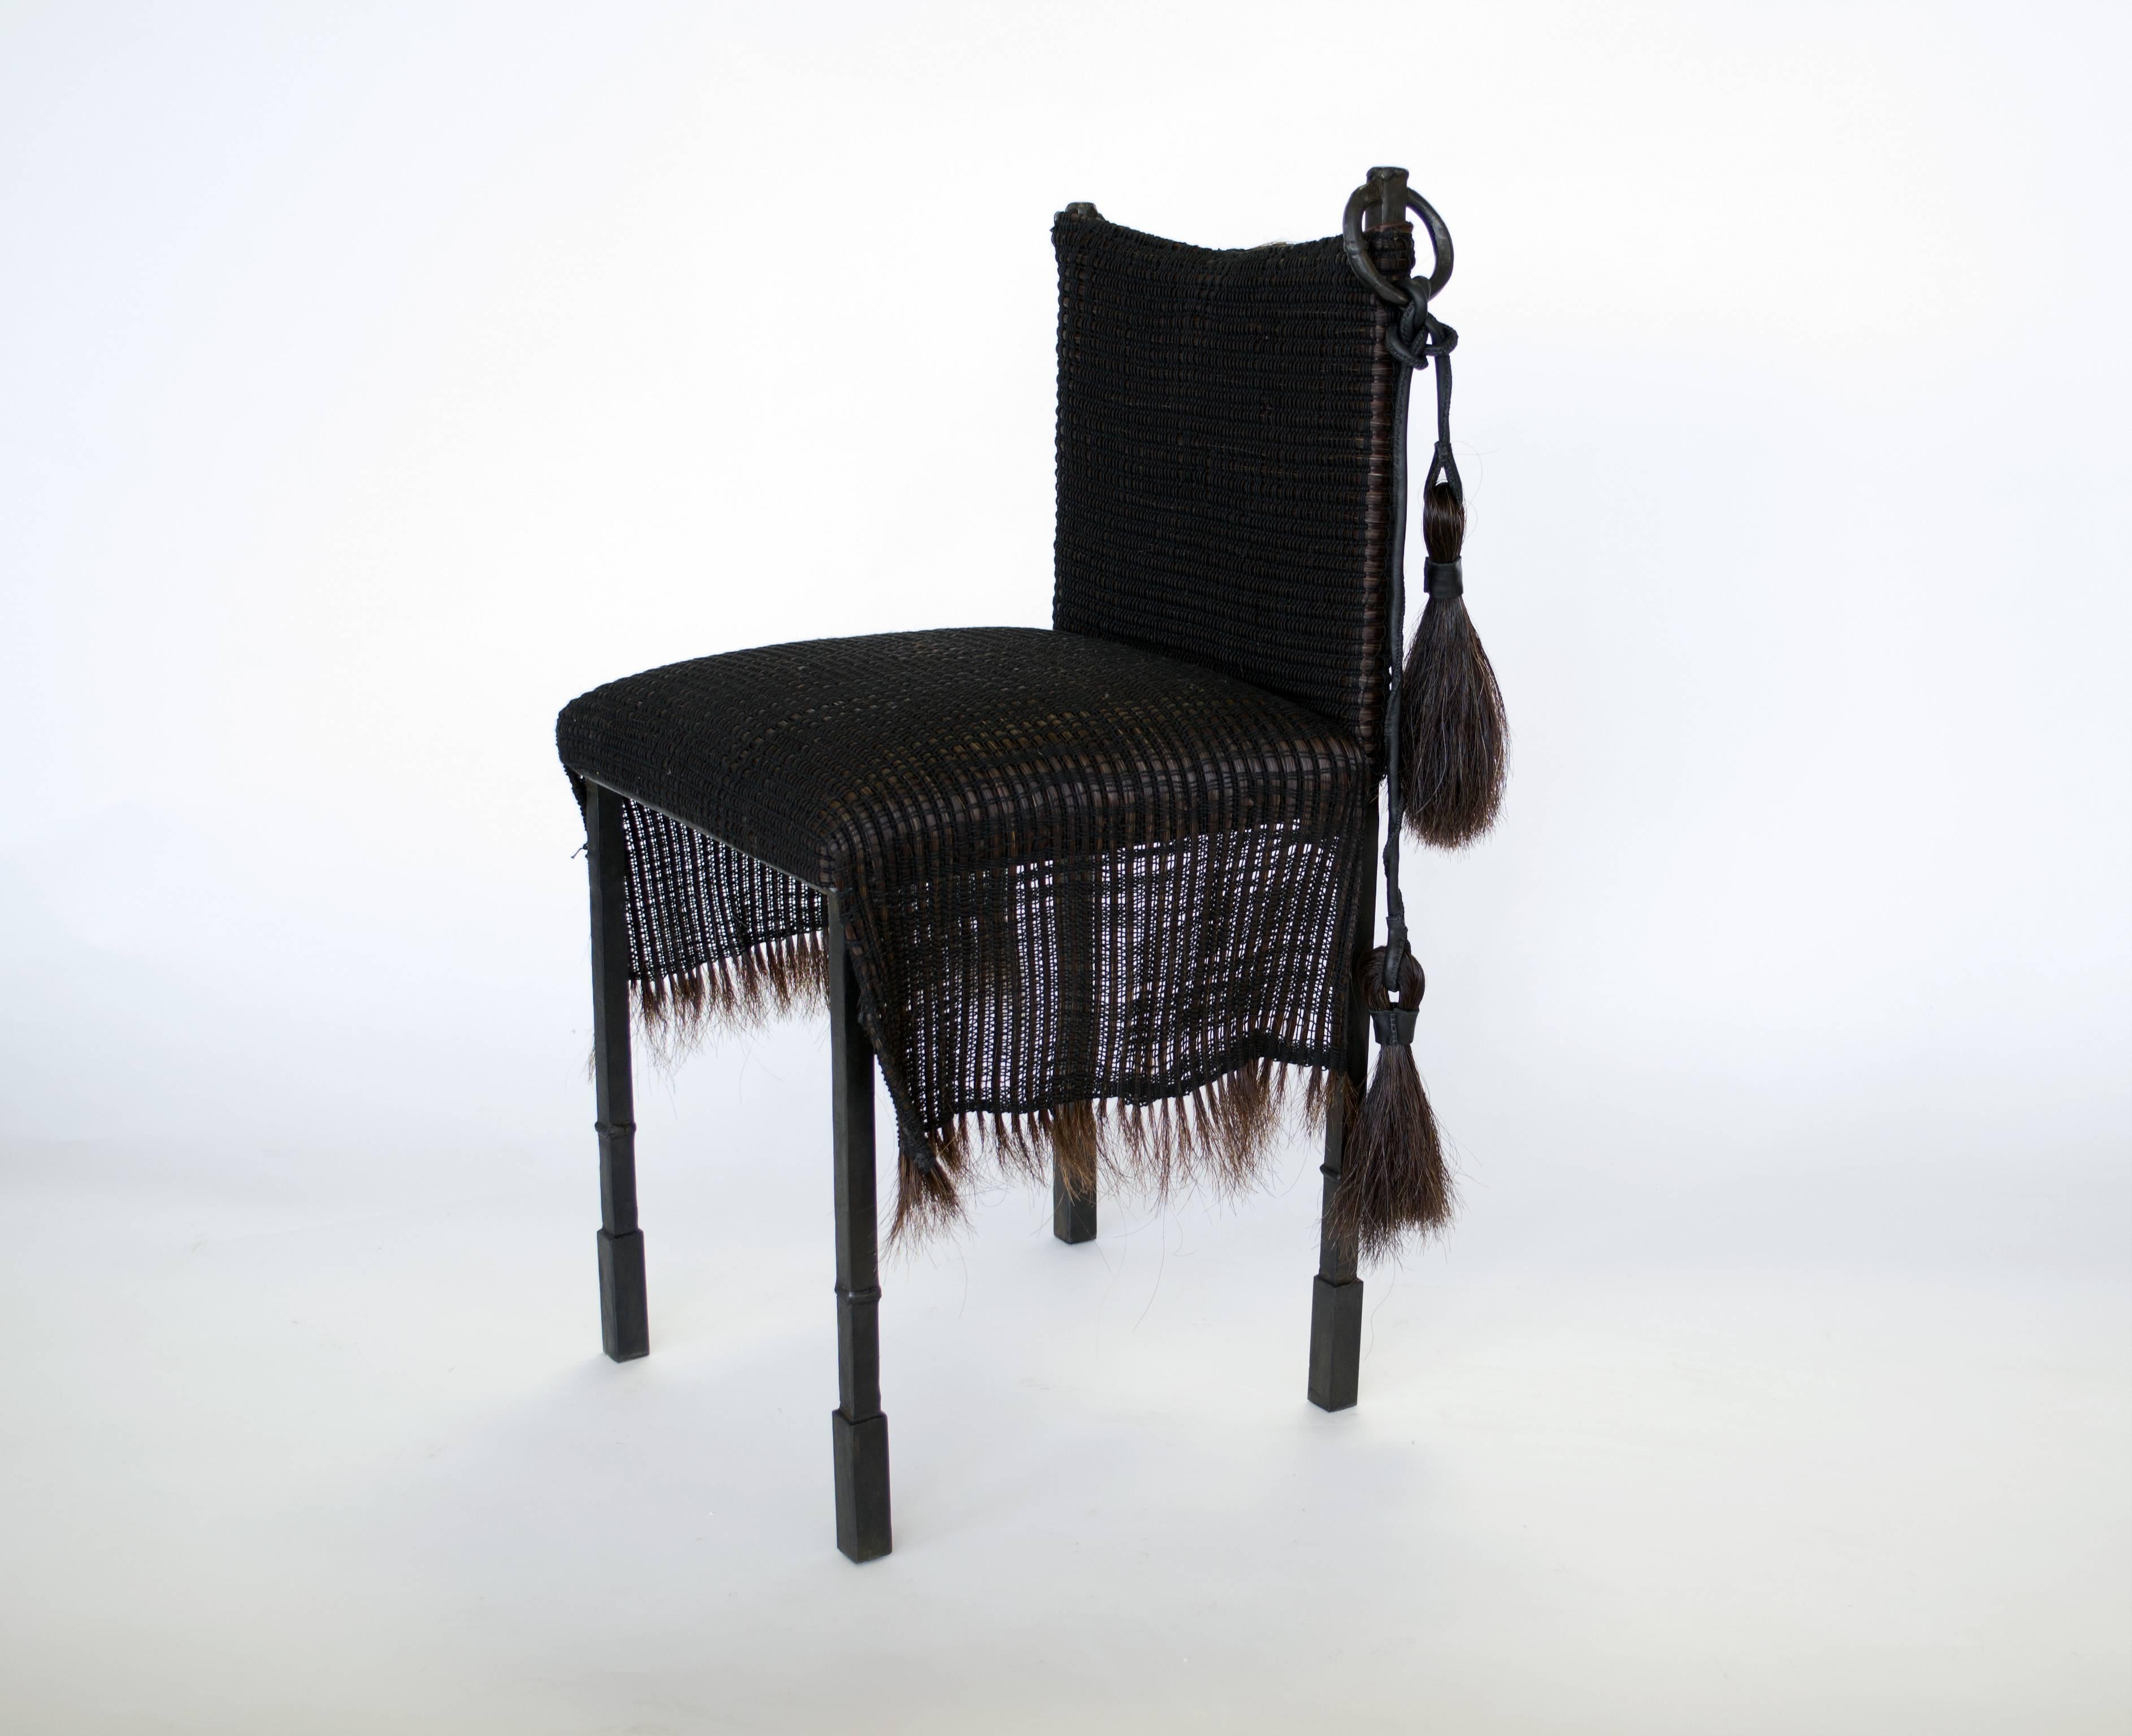 Chair, 2017
Alexandra Kohl & J.M. Szymanski
Horse hair textile, iron and linen
Measures: 33” H, 15” W, 17” D 

Horse-hair textile and blackened iron are combined to form a dynamic juxtaposition of elements. The artists attempt to evoke the